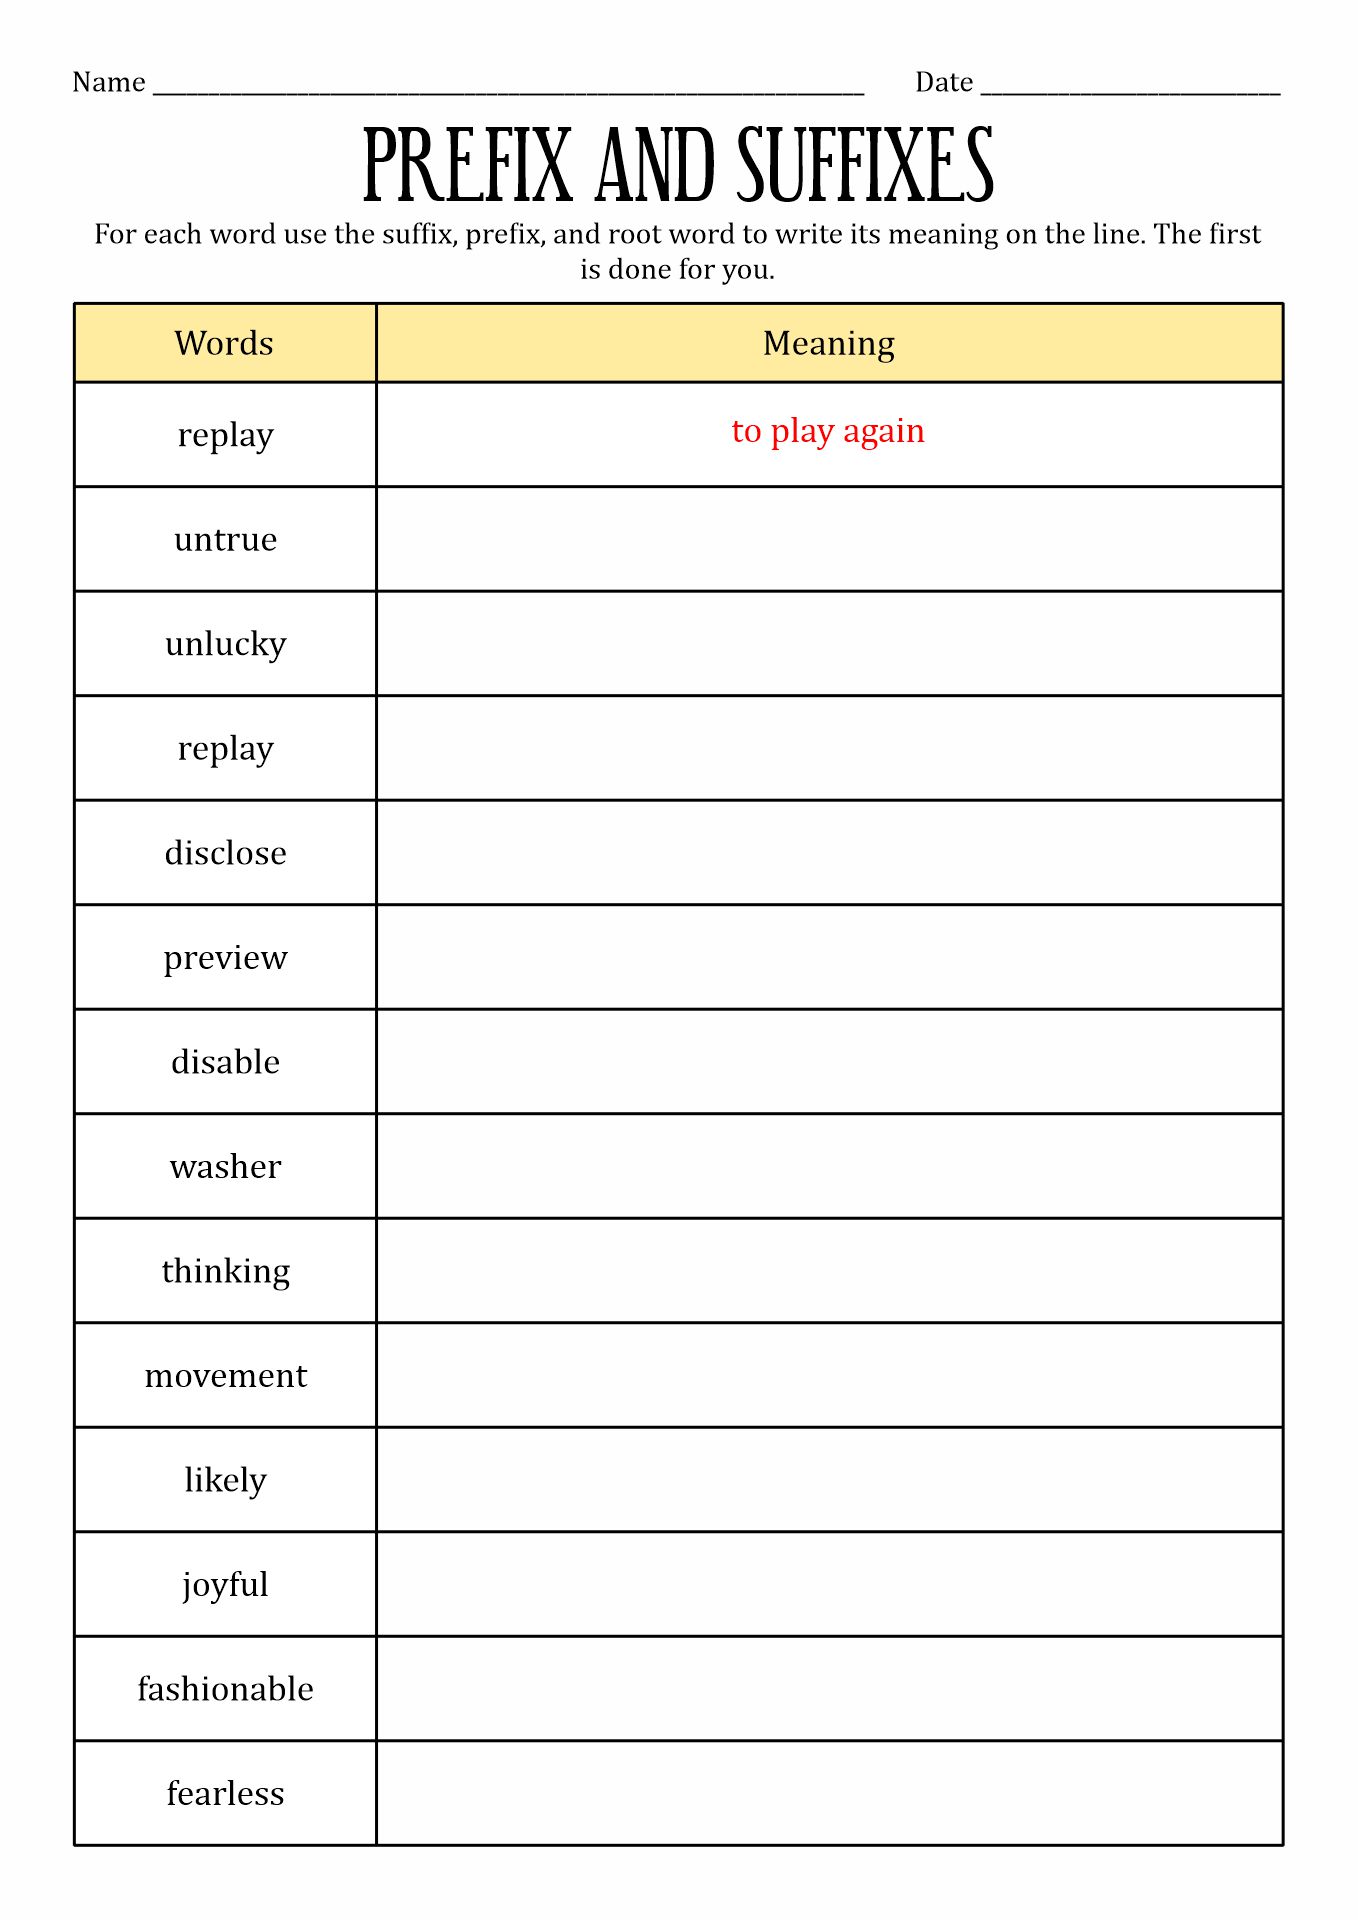 suffix-and-prefix-worksheet-with-answers